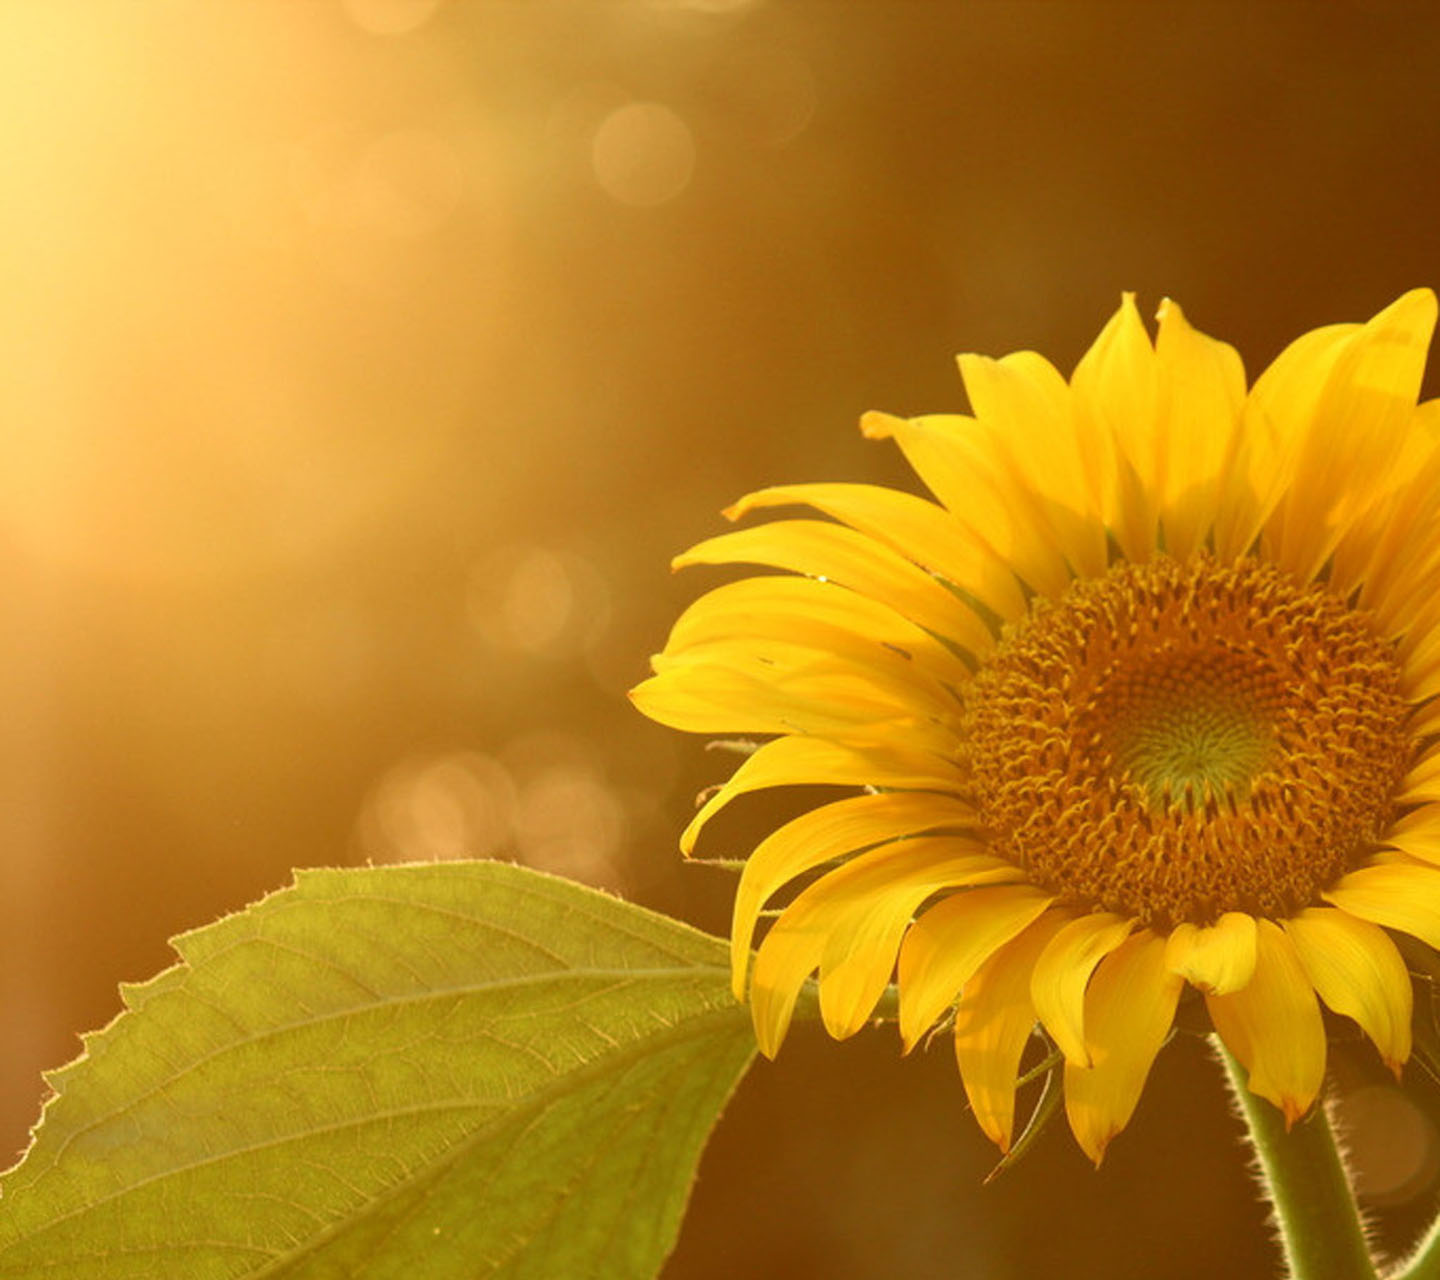 Sunflower - Sunflower Pic For Home Screen , HD Wallpaper & Backgrounds